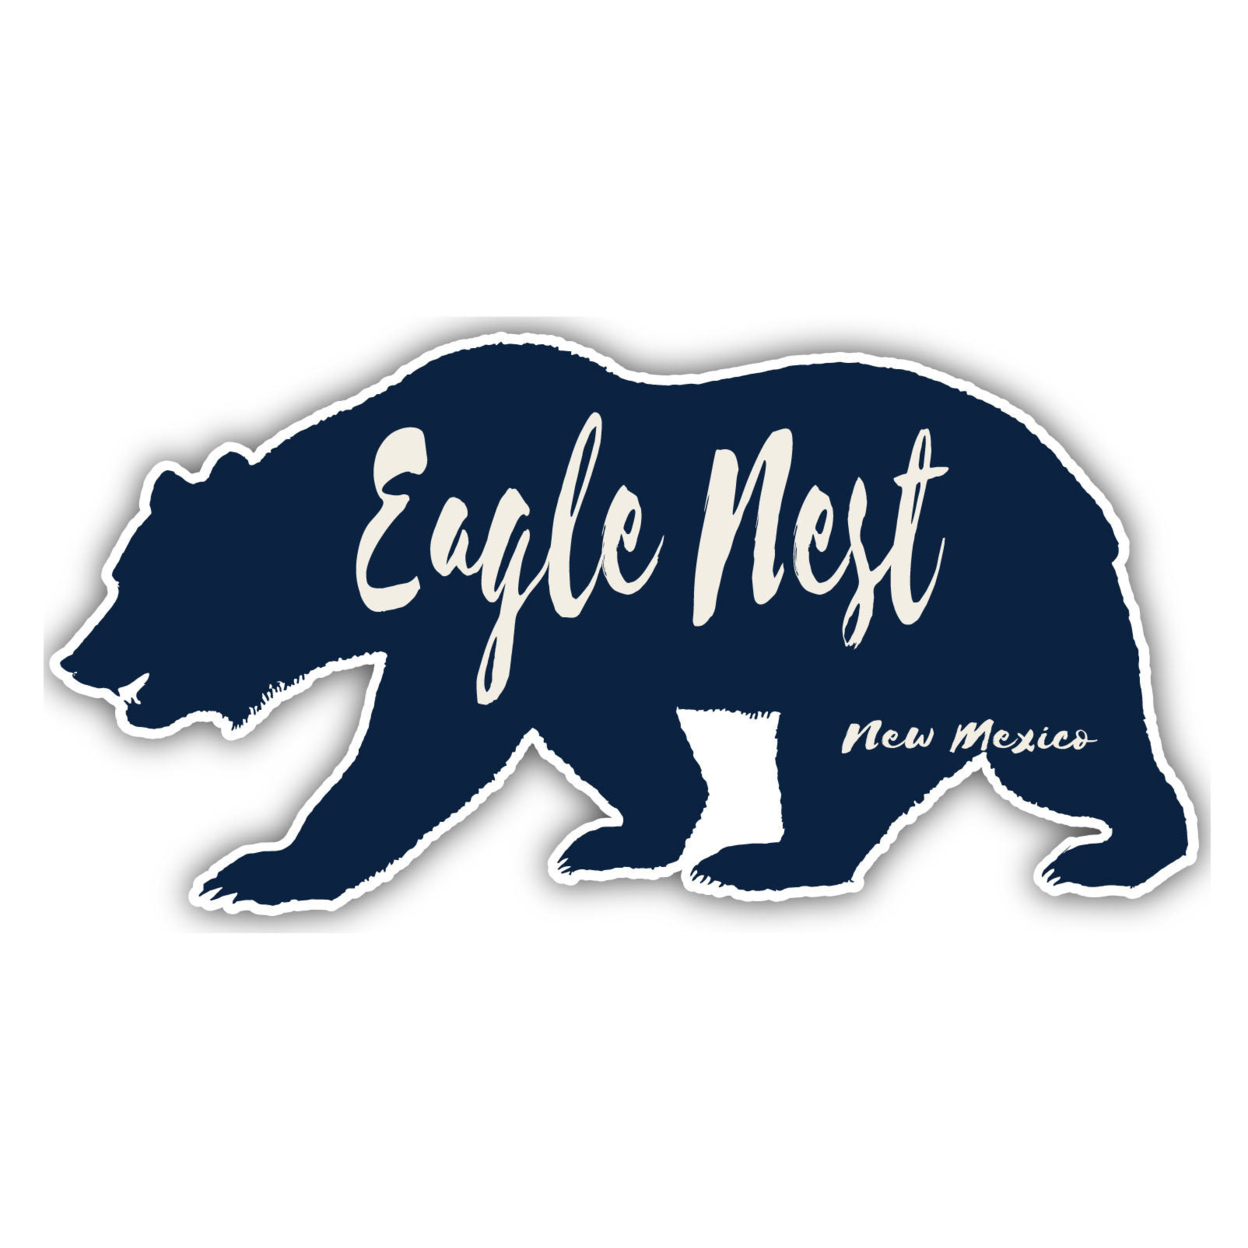 Eagle Nest New Mexico Souvenir Decorative Stickers (Choose Theme And Size) - 4-Pack, 8-Inch, Bear